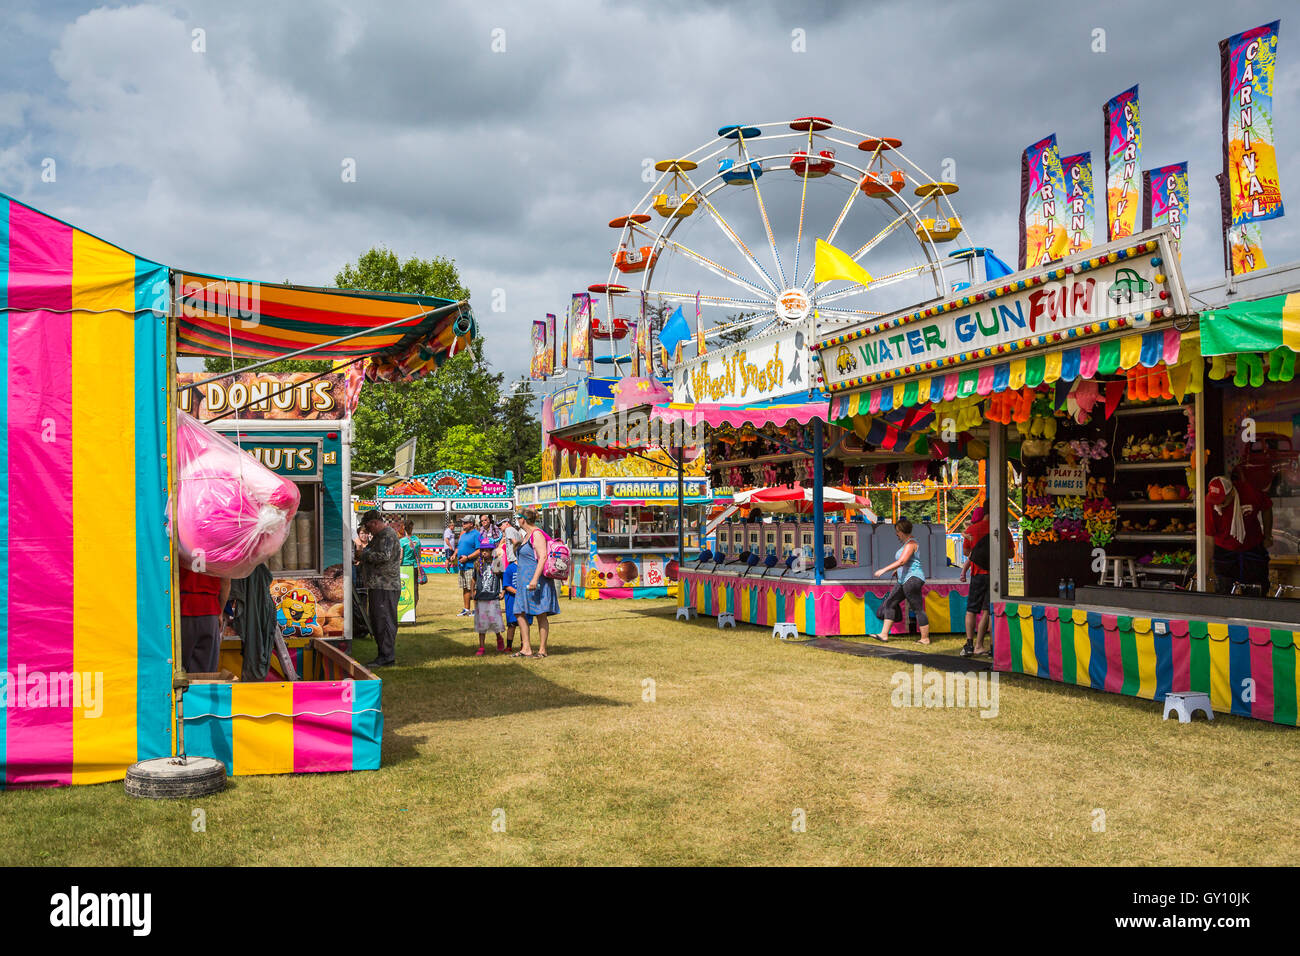 The Wonder Shows midway at the Icelandic Festival in Gimli, Manitoba, Canada. Stock Photo